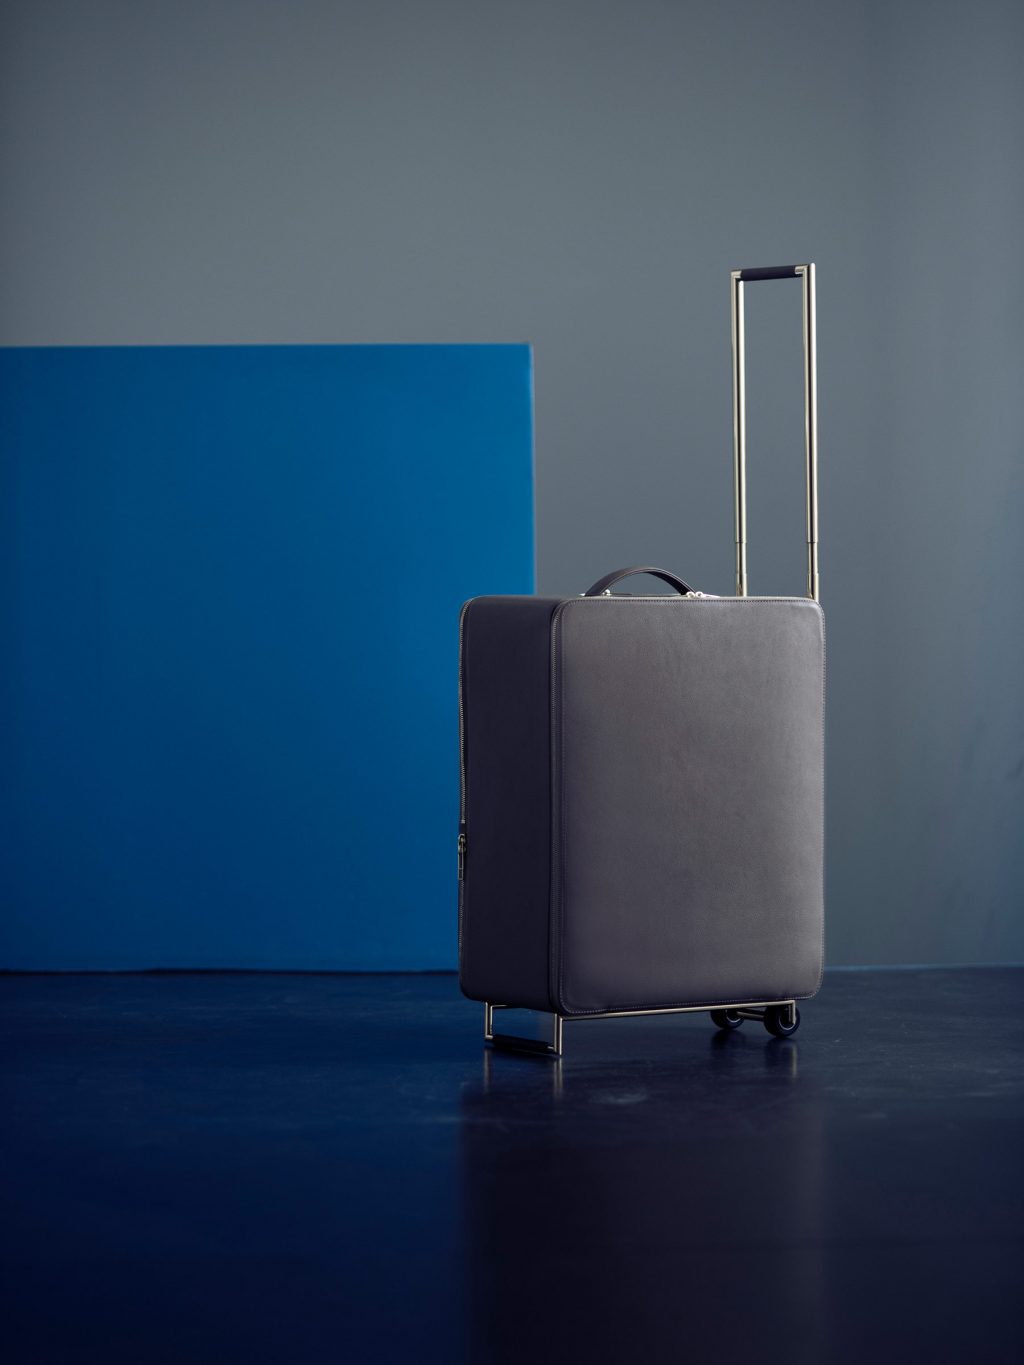 TSATSAS KAGE suitcase designed for the Wallpaper* Handmade exhibition in 2013